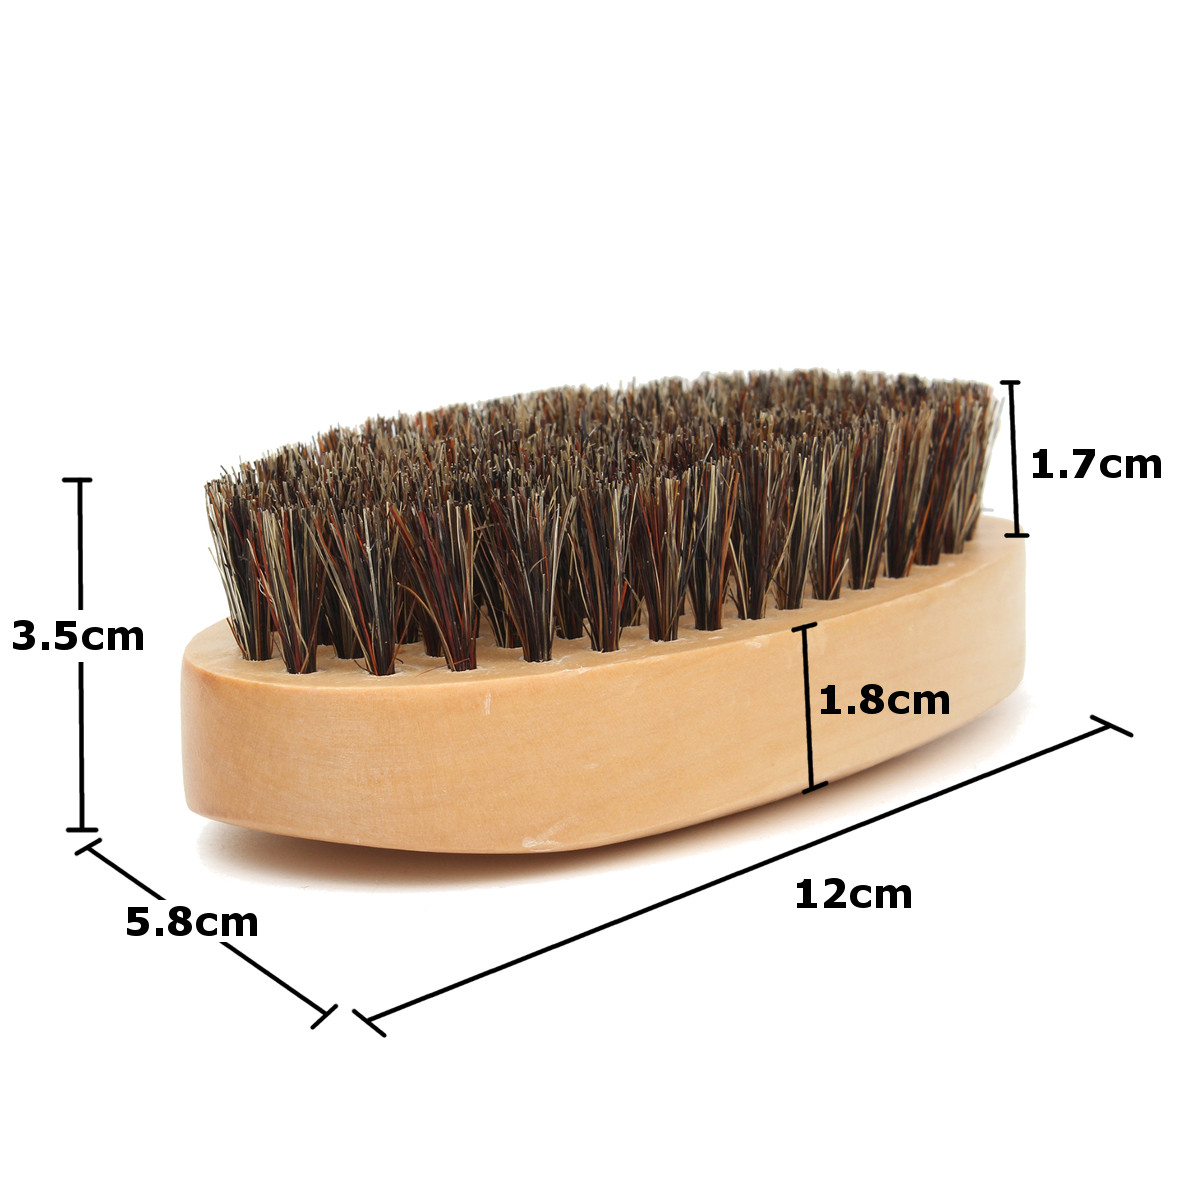 Wood Handle Boar Bristle Beard Taming Mustache Brush Smooth Style Hair Comb